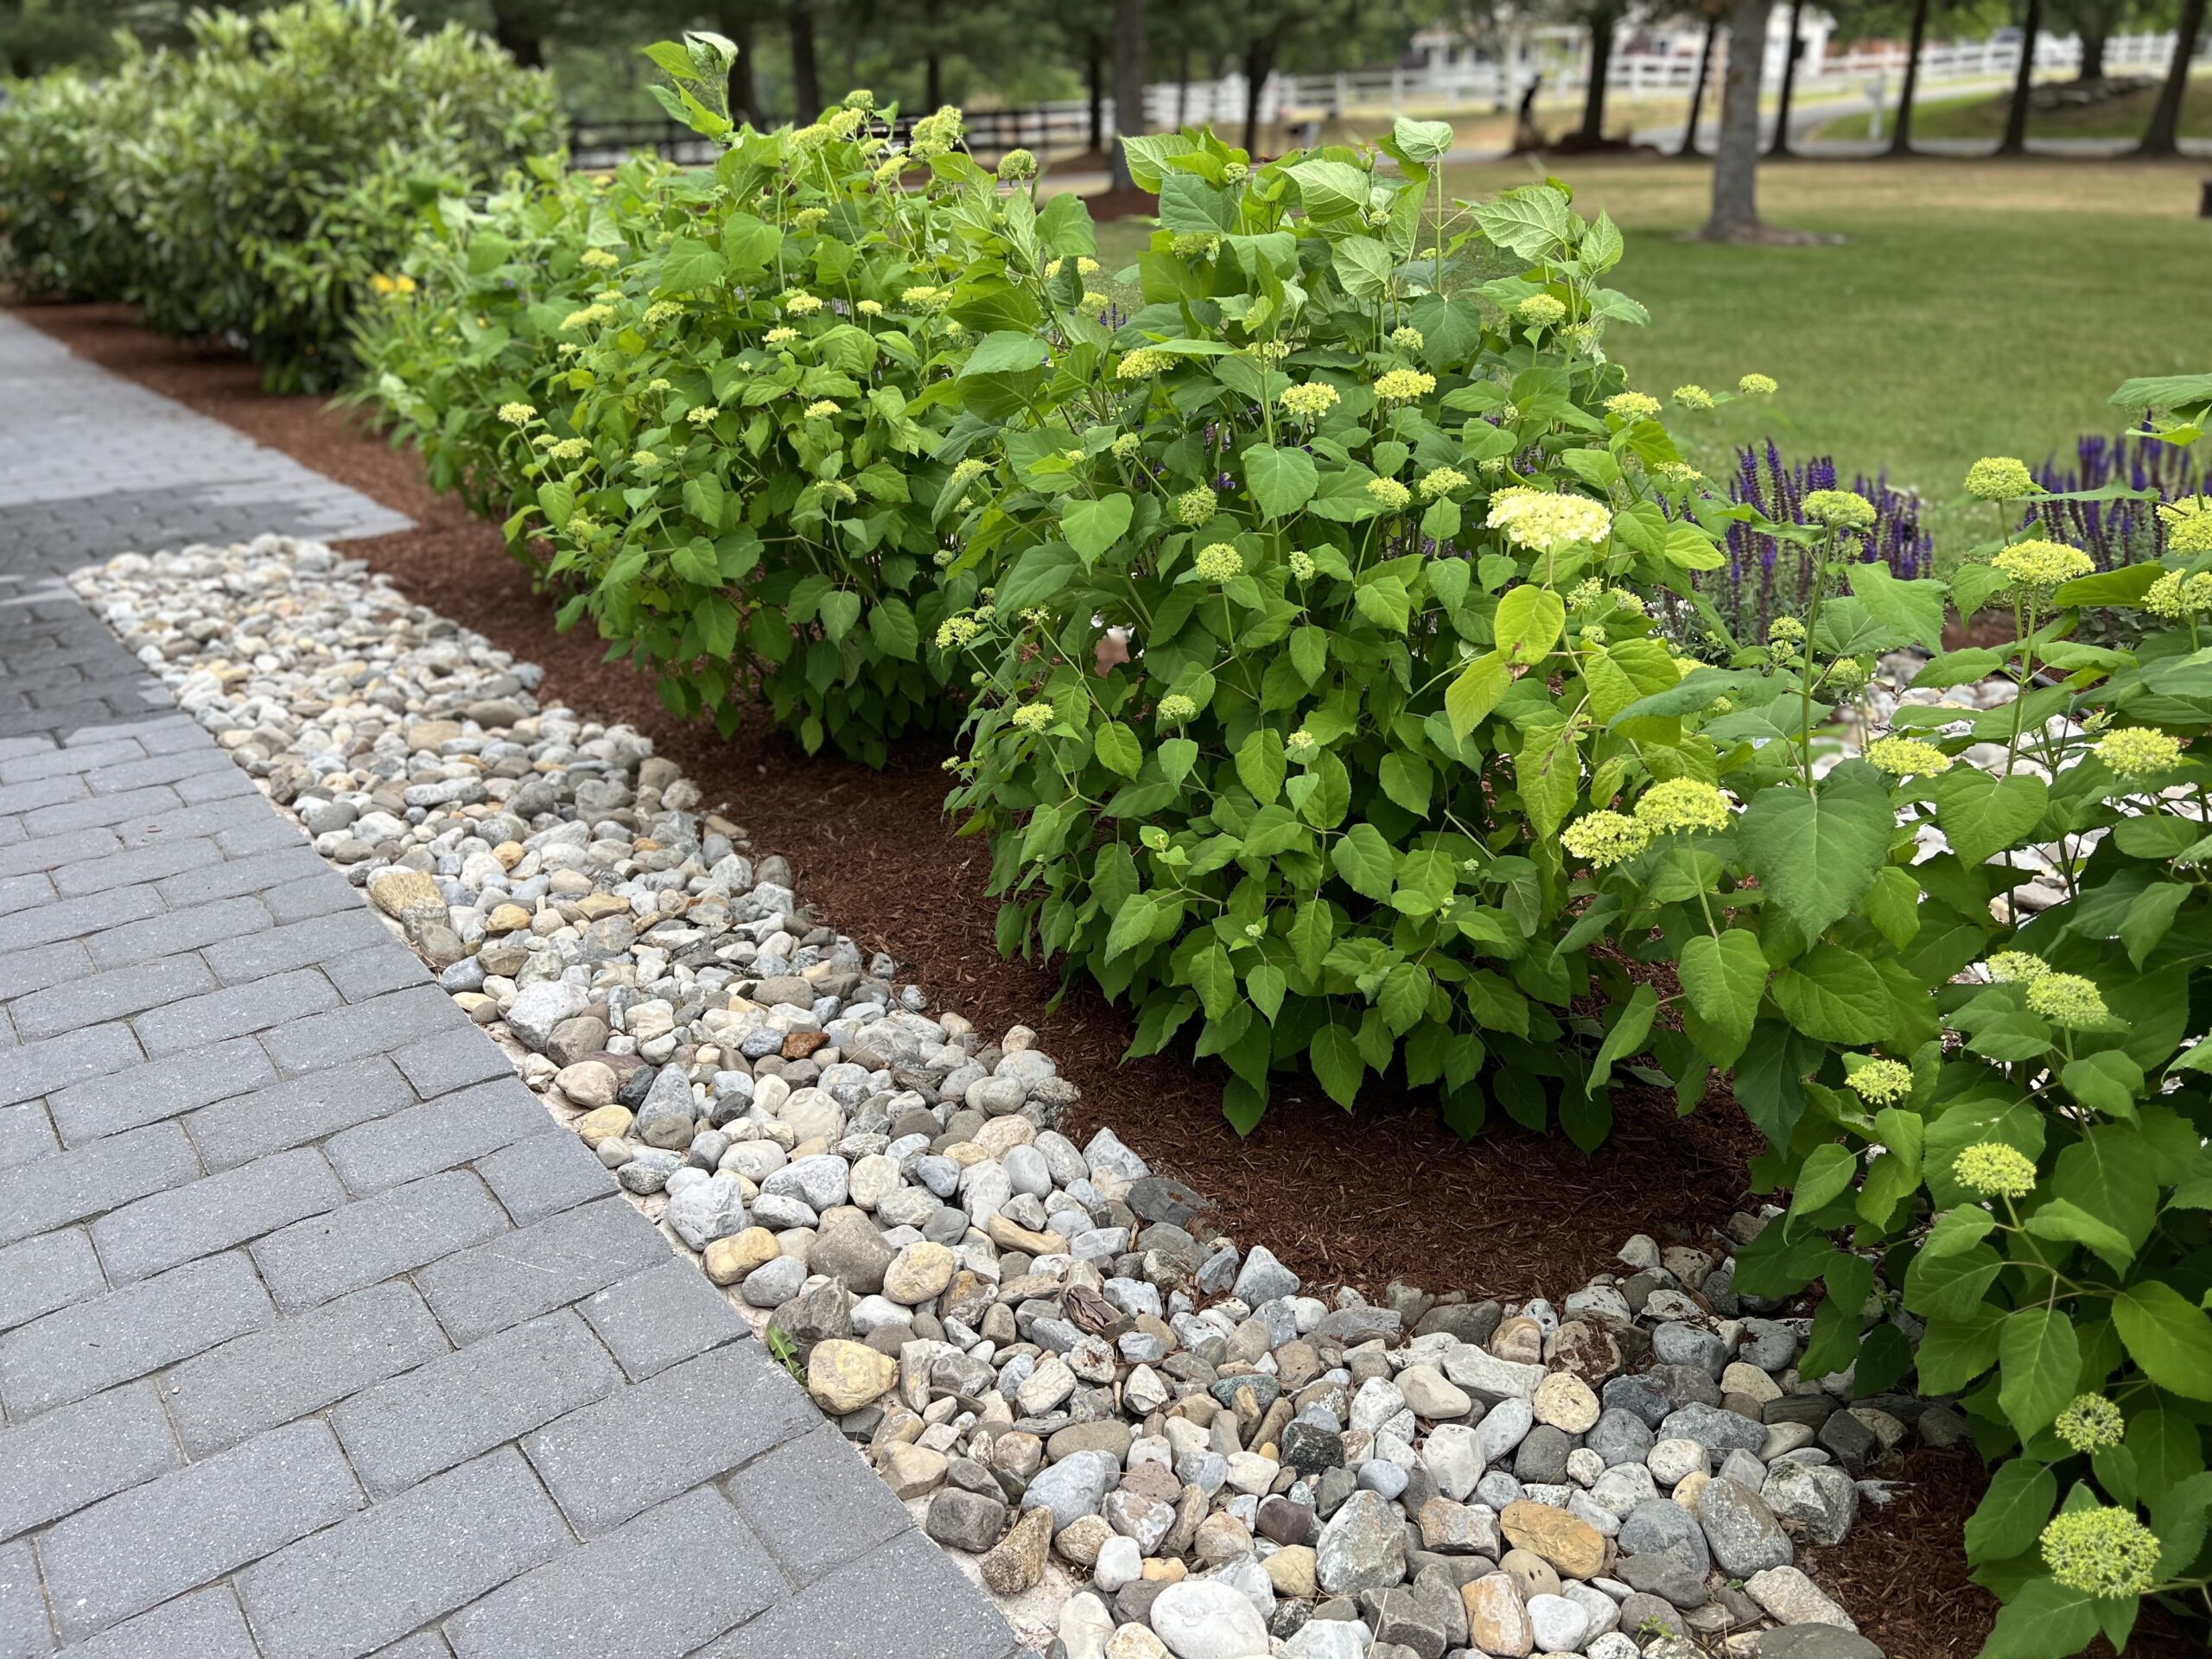 Landscaping company in blairstown nj